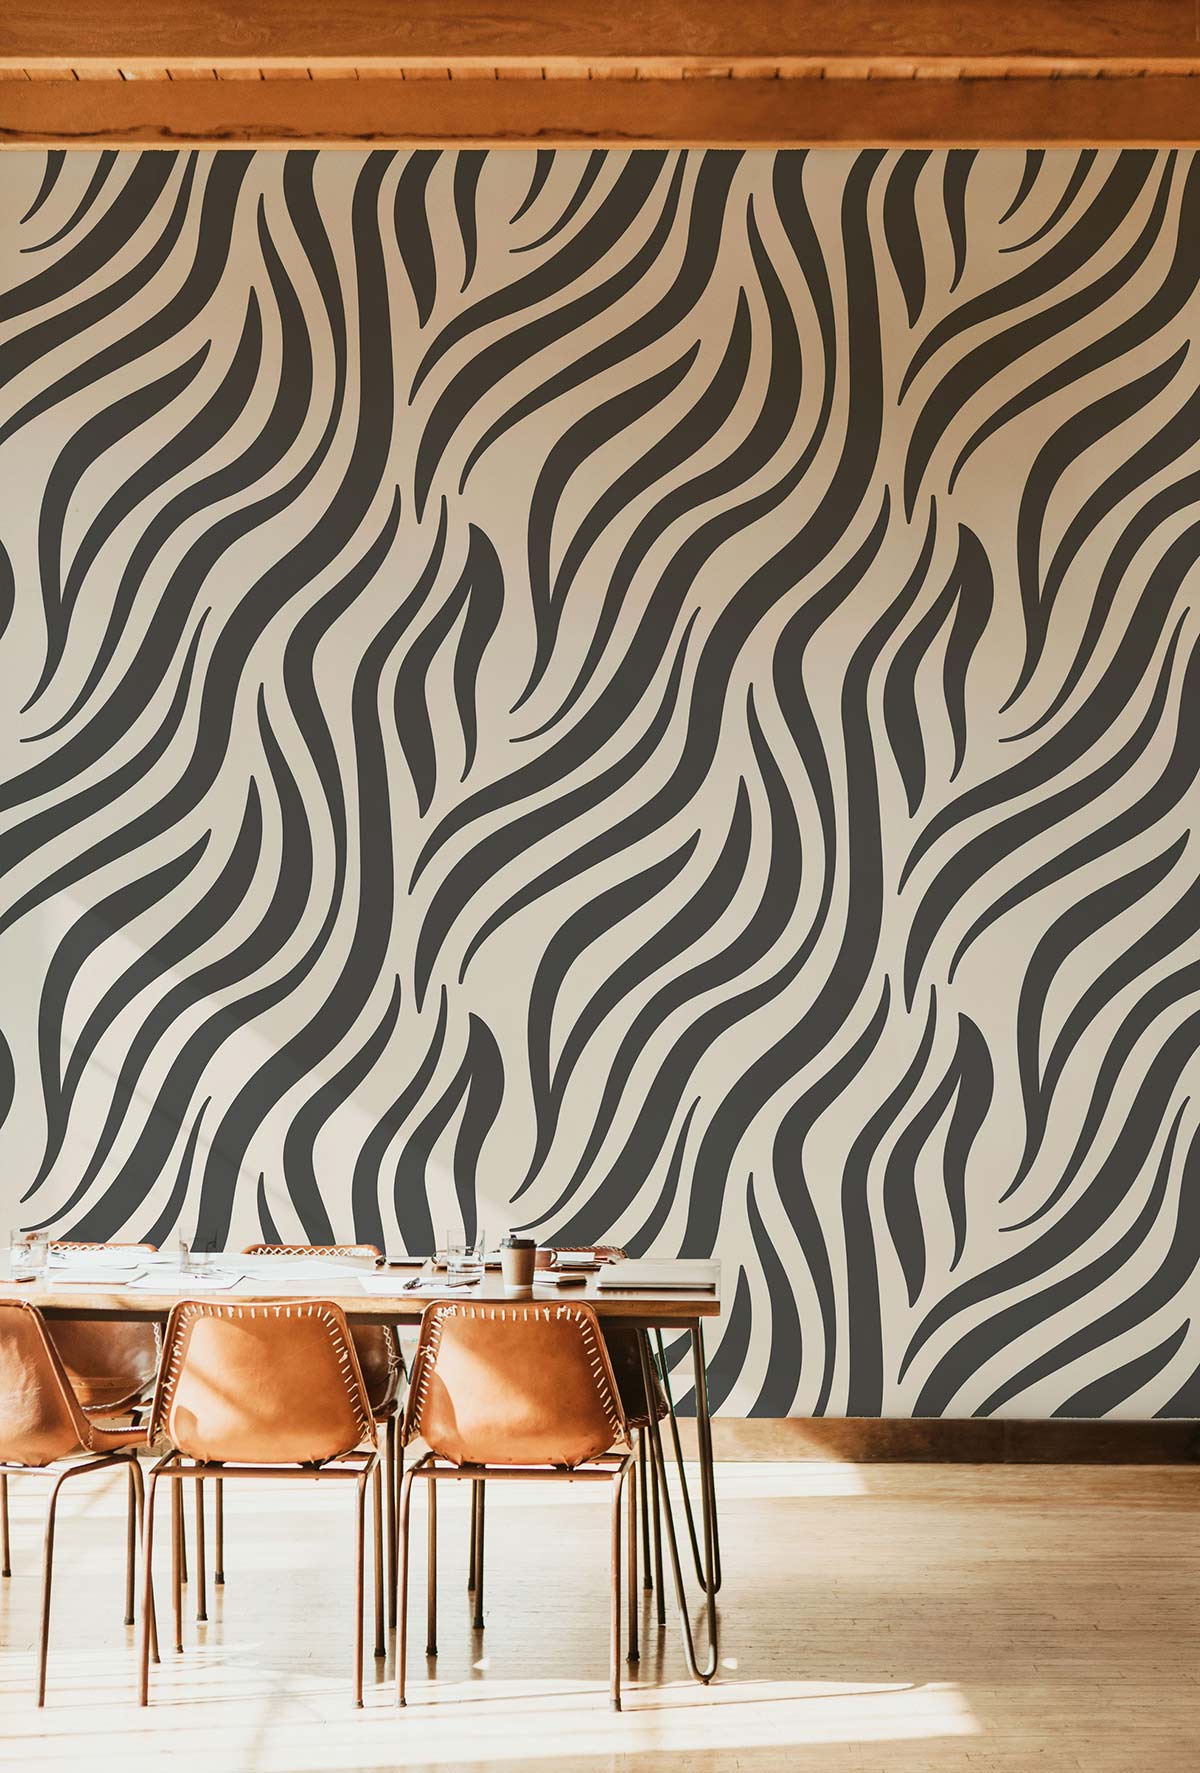 For the purpose of adorning the dining area, a neutral animal fur wallpaper mural